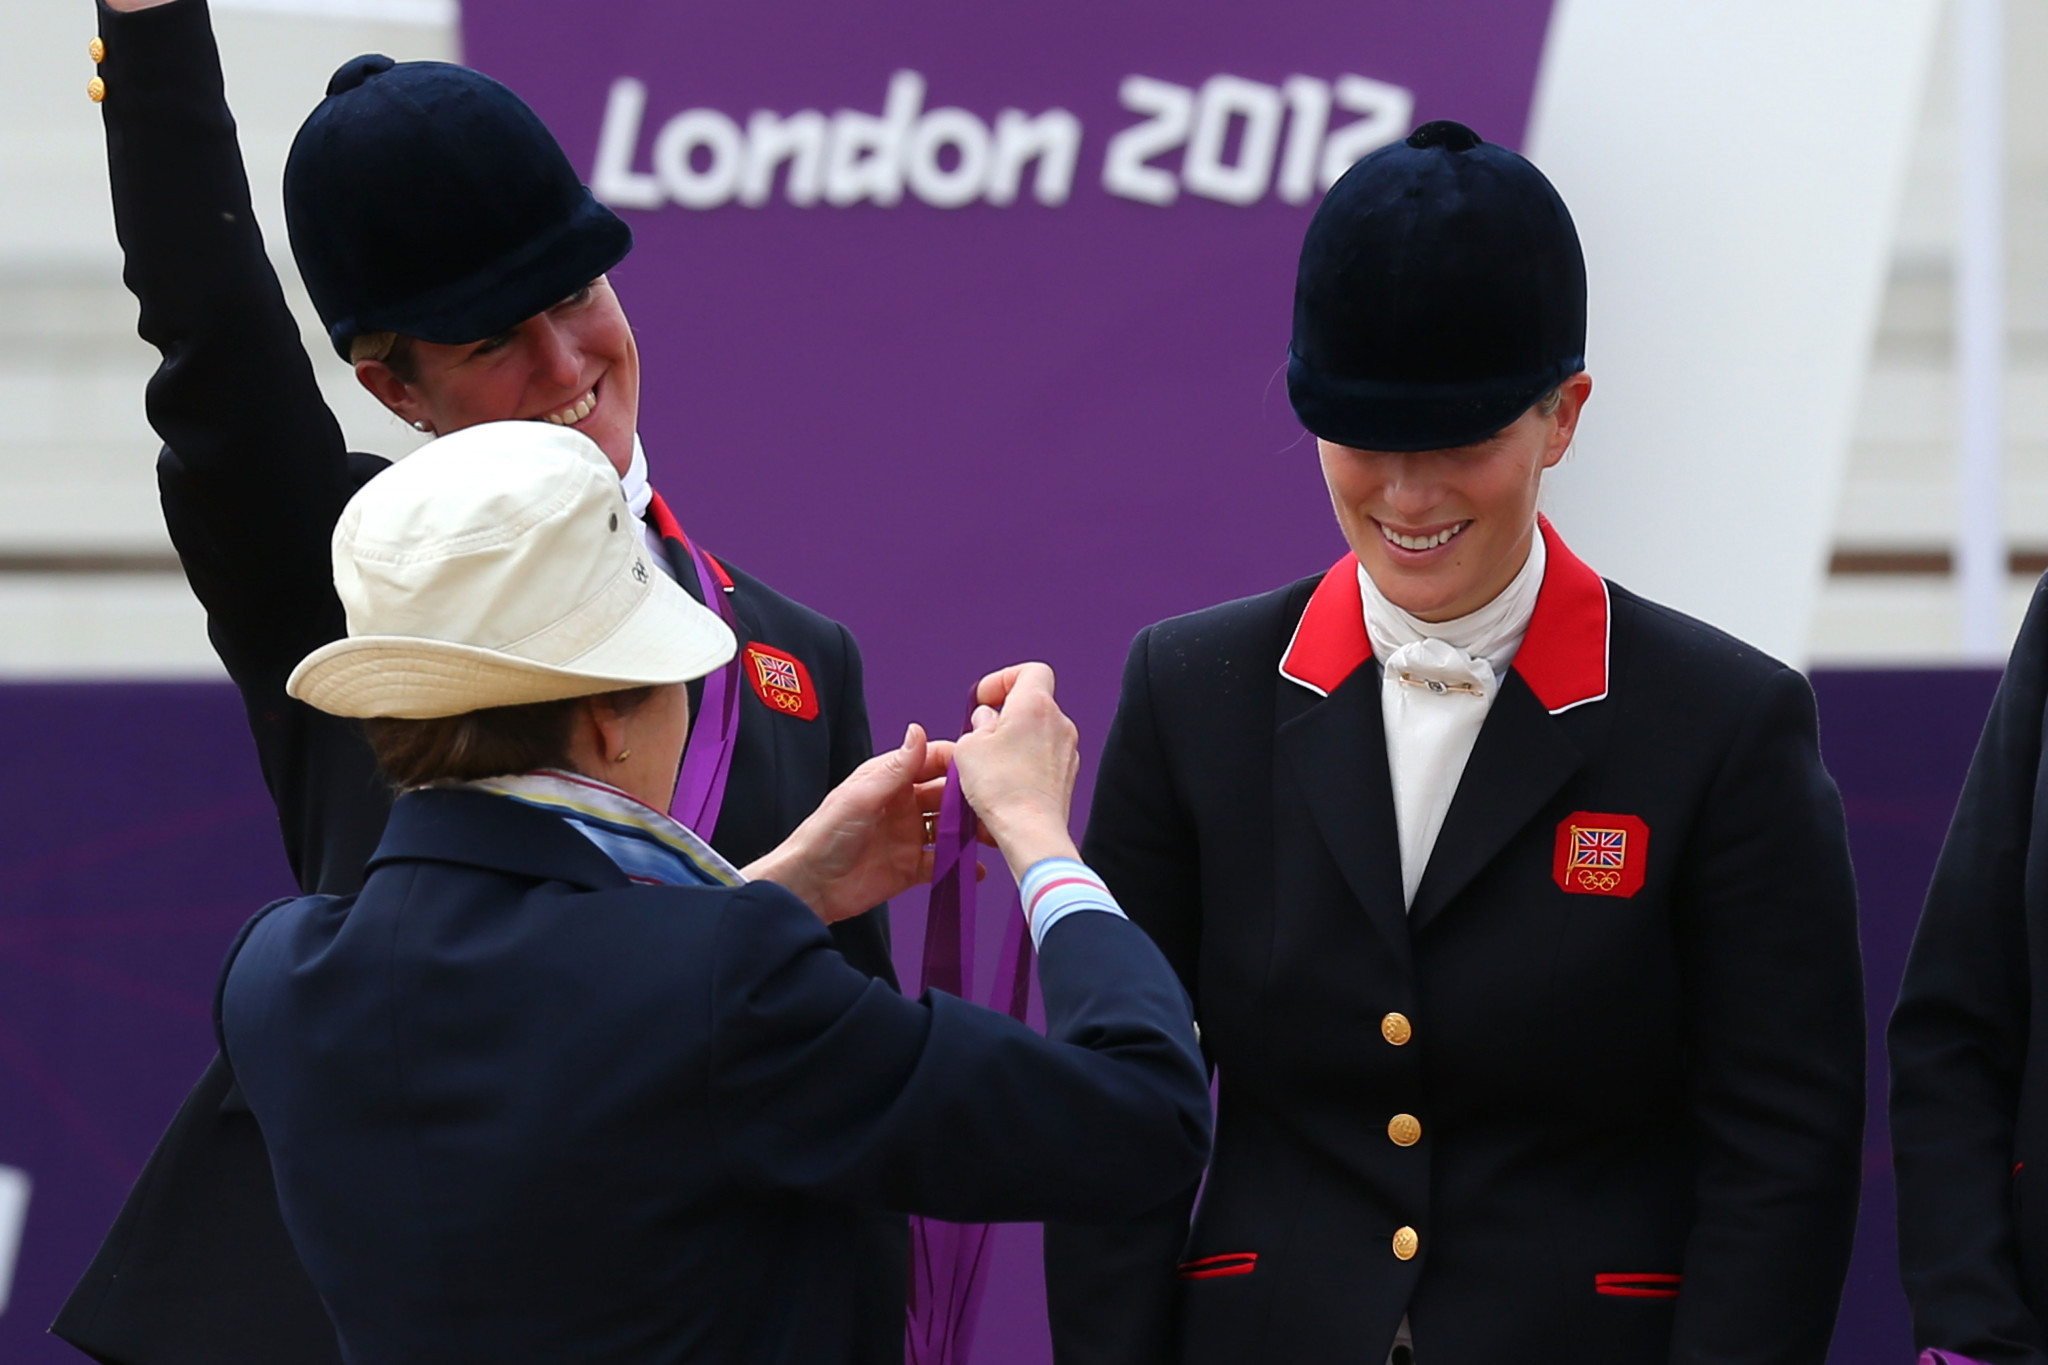 Princess Anne, centre, presents a silver medal to daughter Zara Phillips, right, at London 2012 ©Getty Images